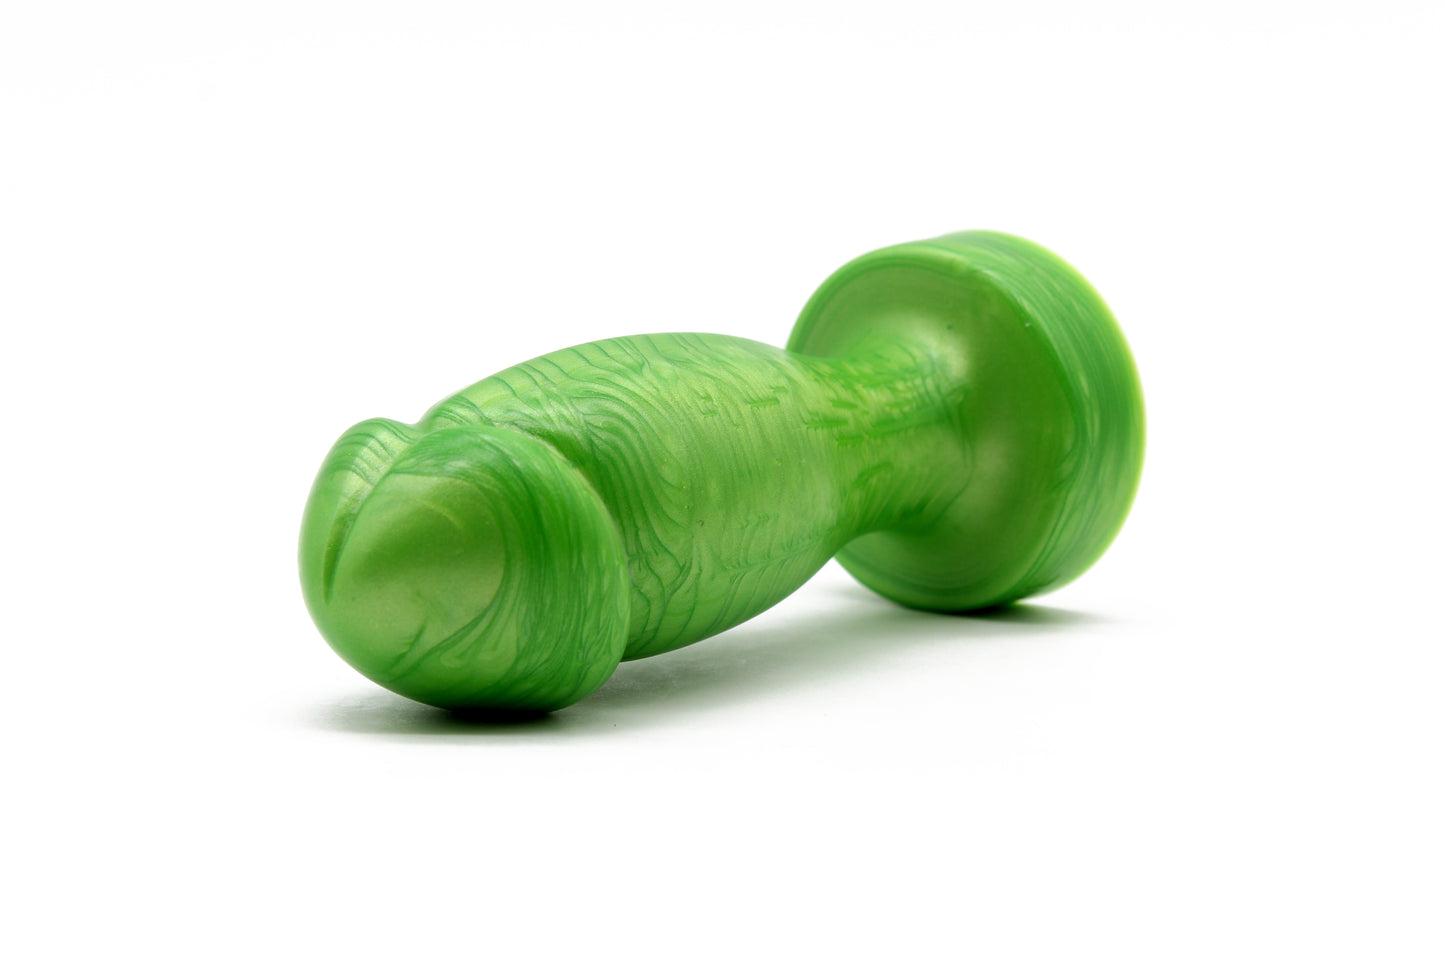 The Sentio Squishy Vaginal and or Butt Plug